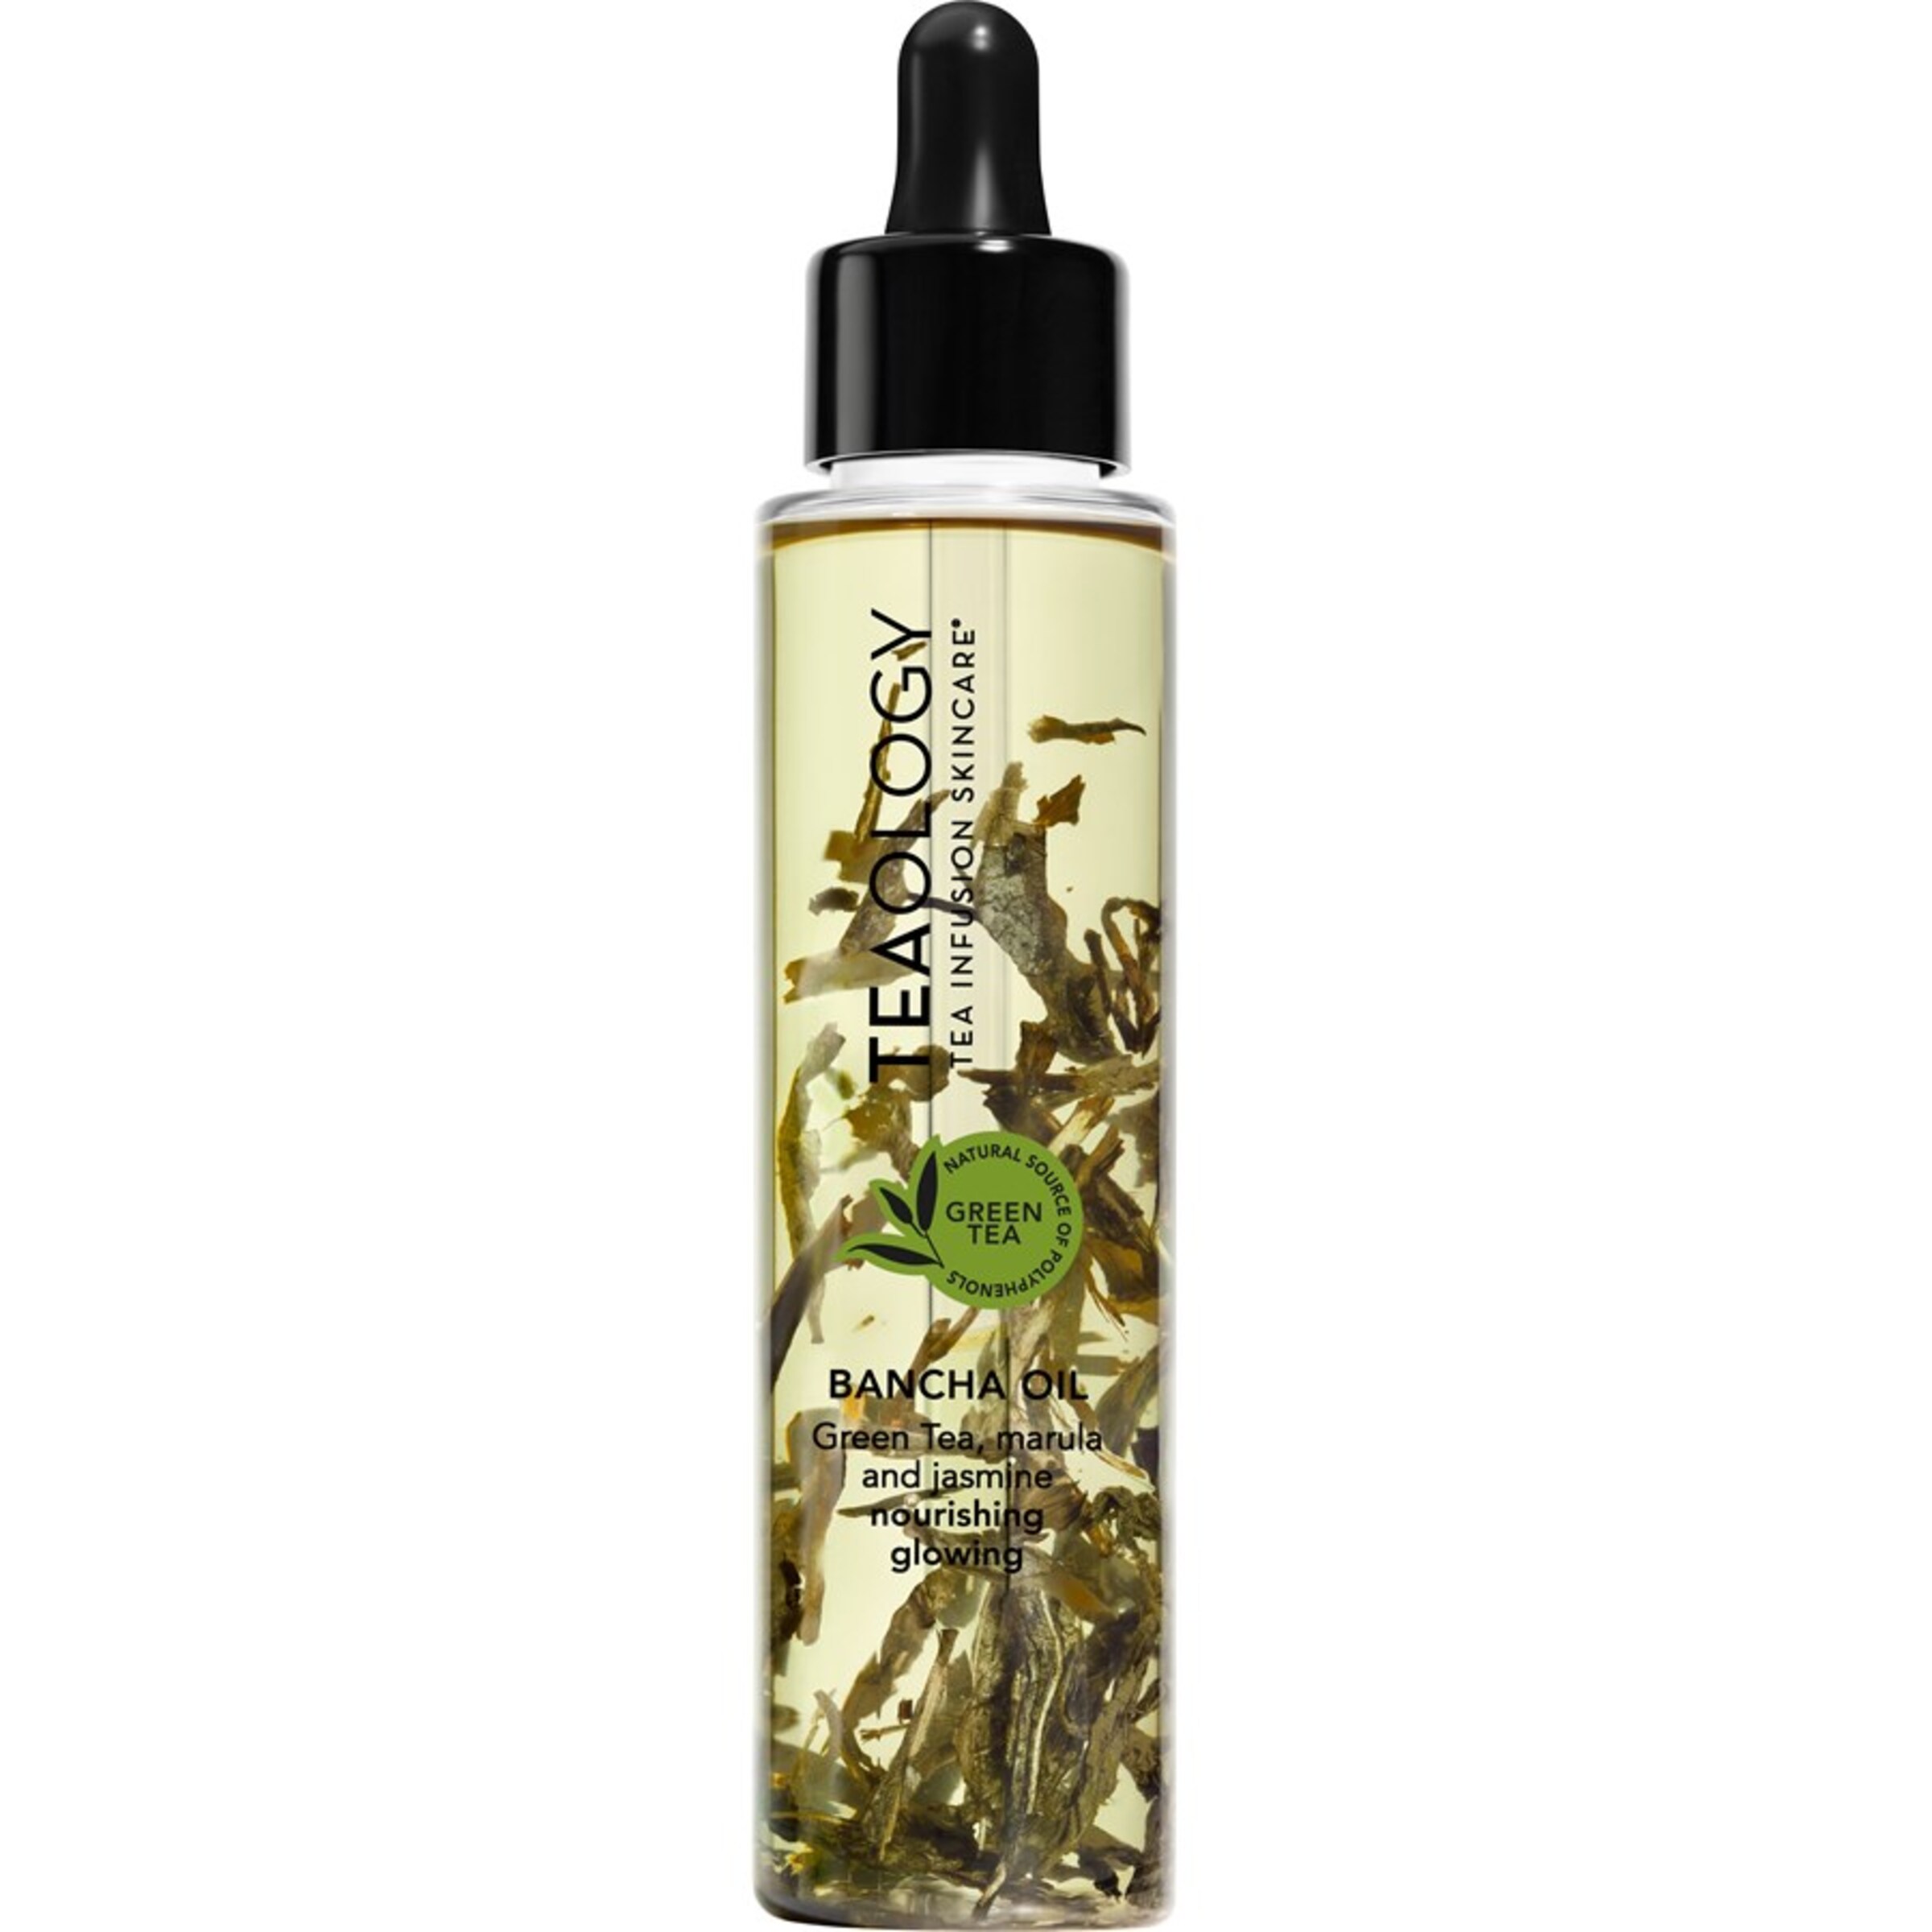 Teaology Oil Bancha in 